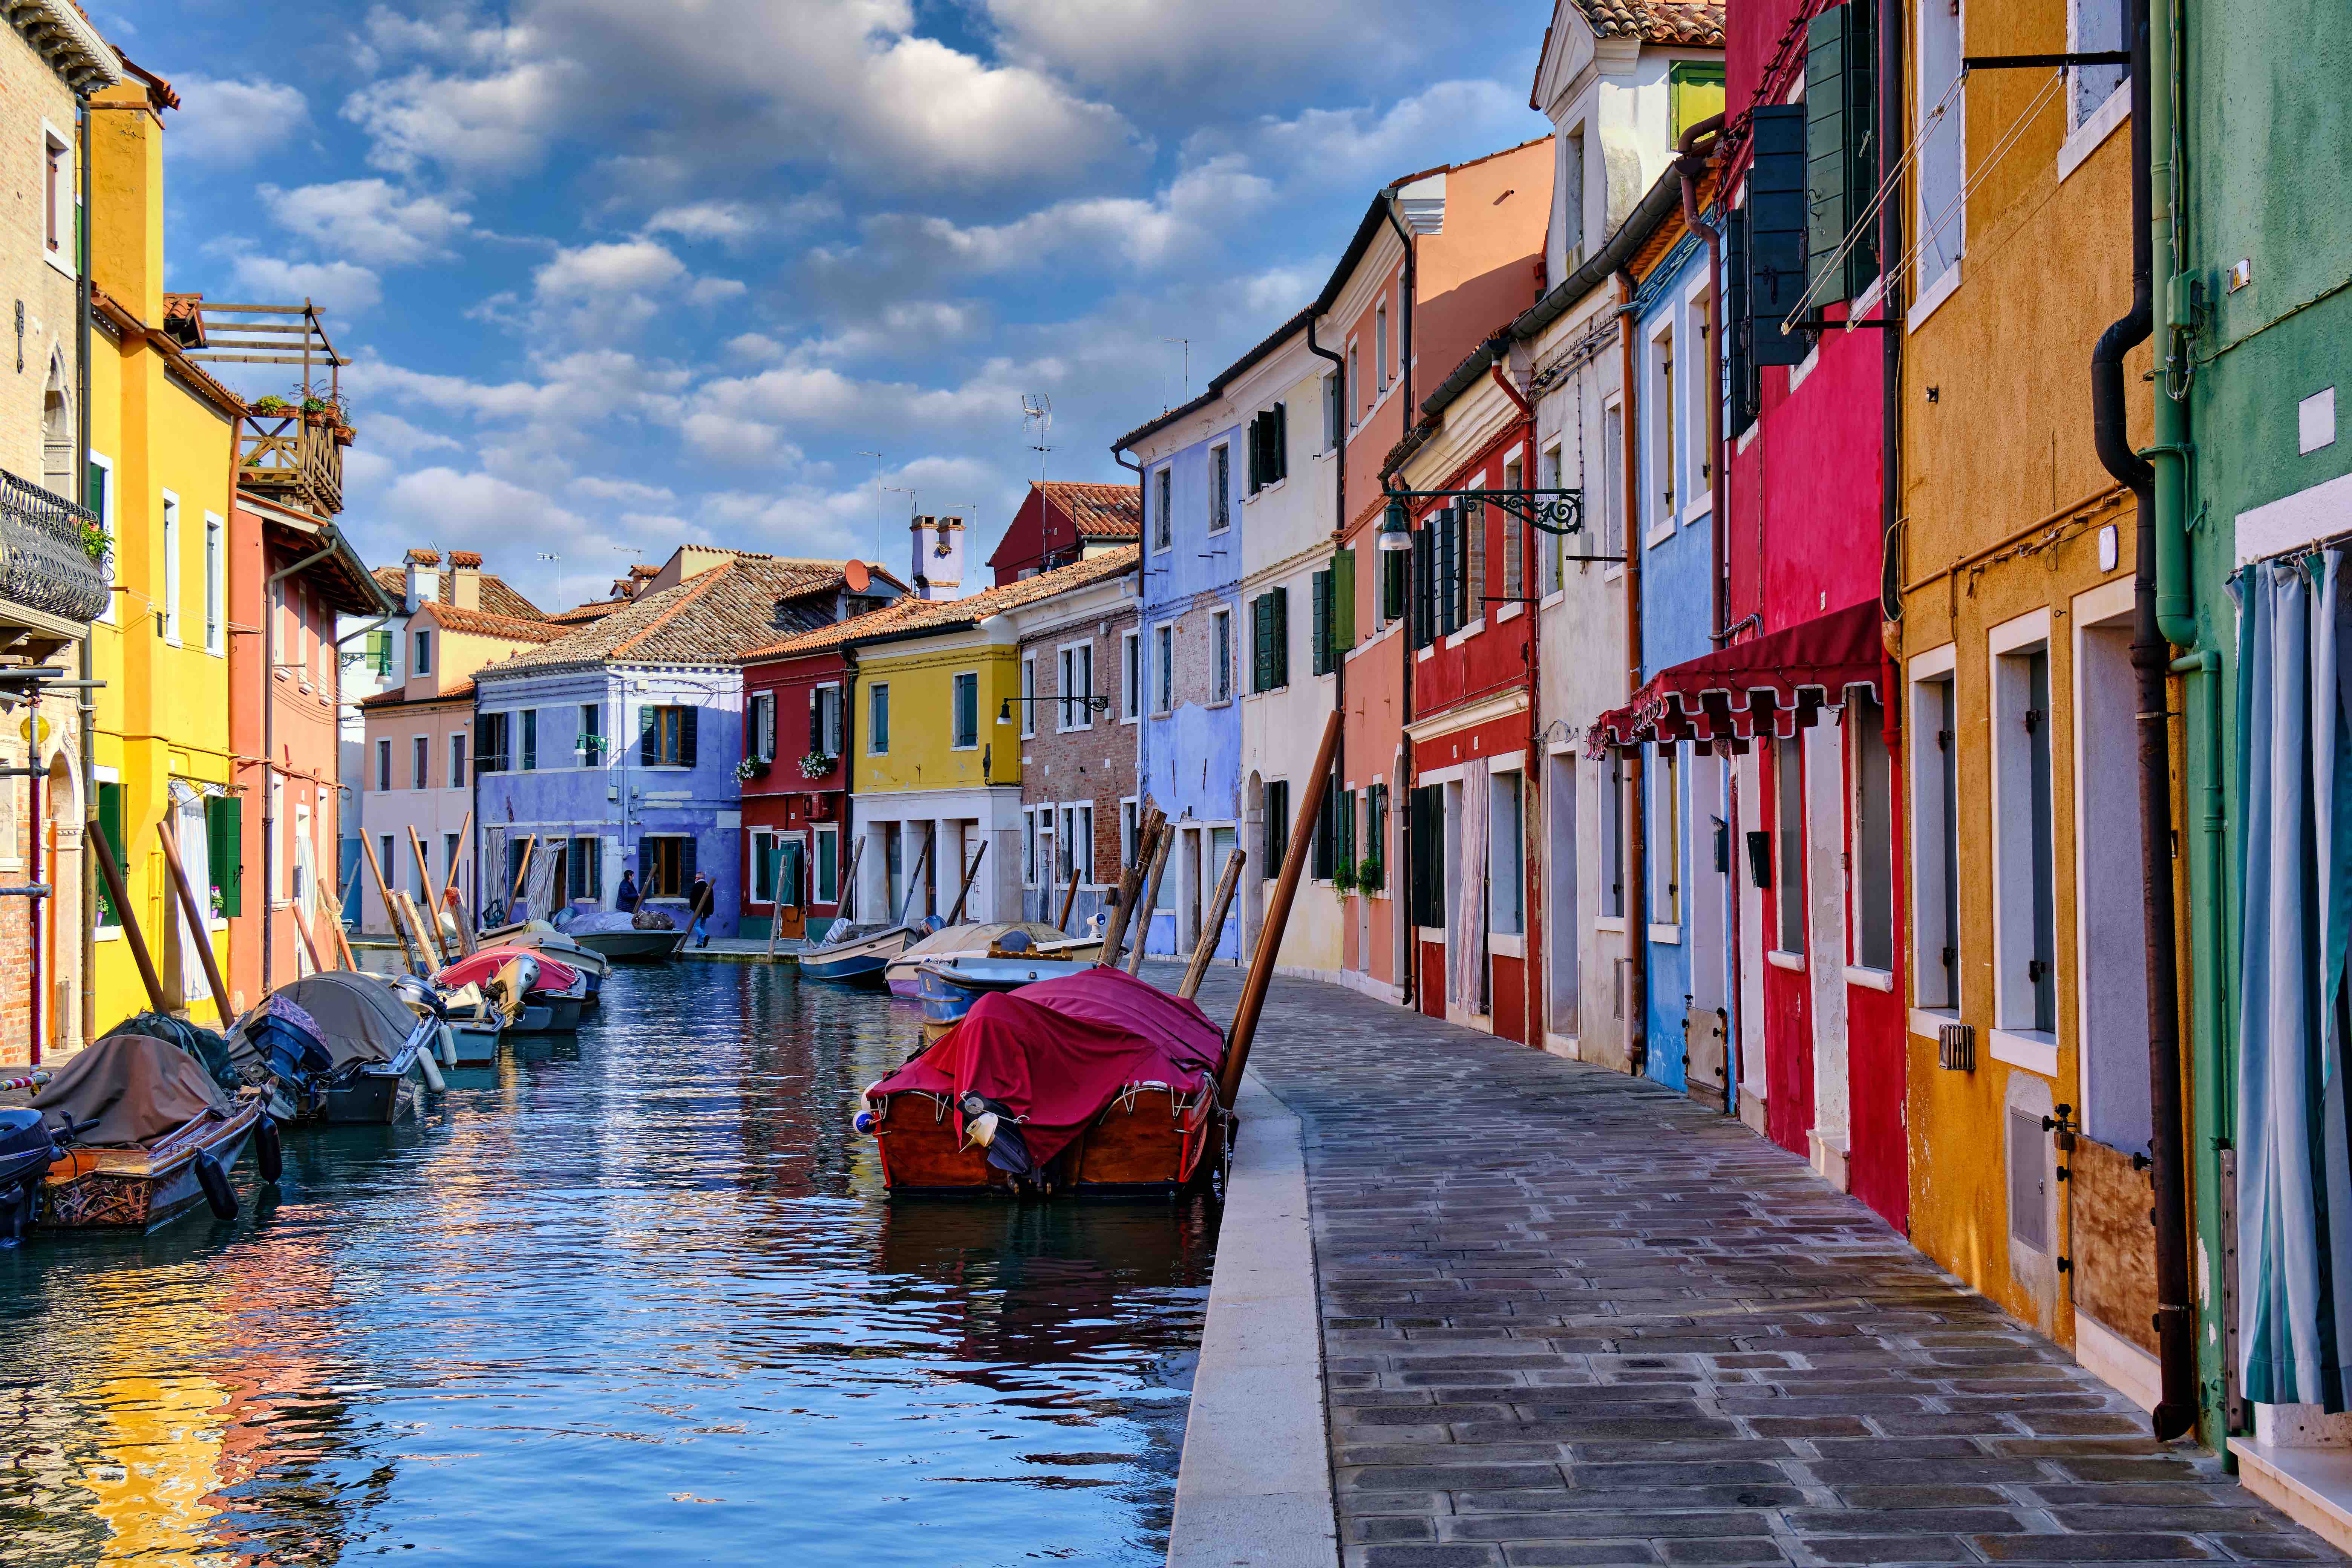 Colorful buildings and boats along a canal and sidewalk in Burano, Italy